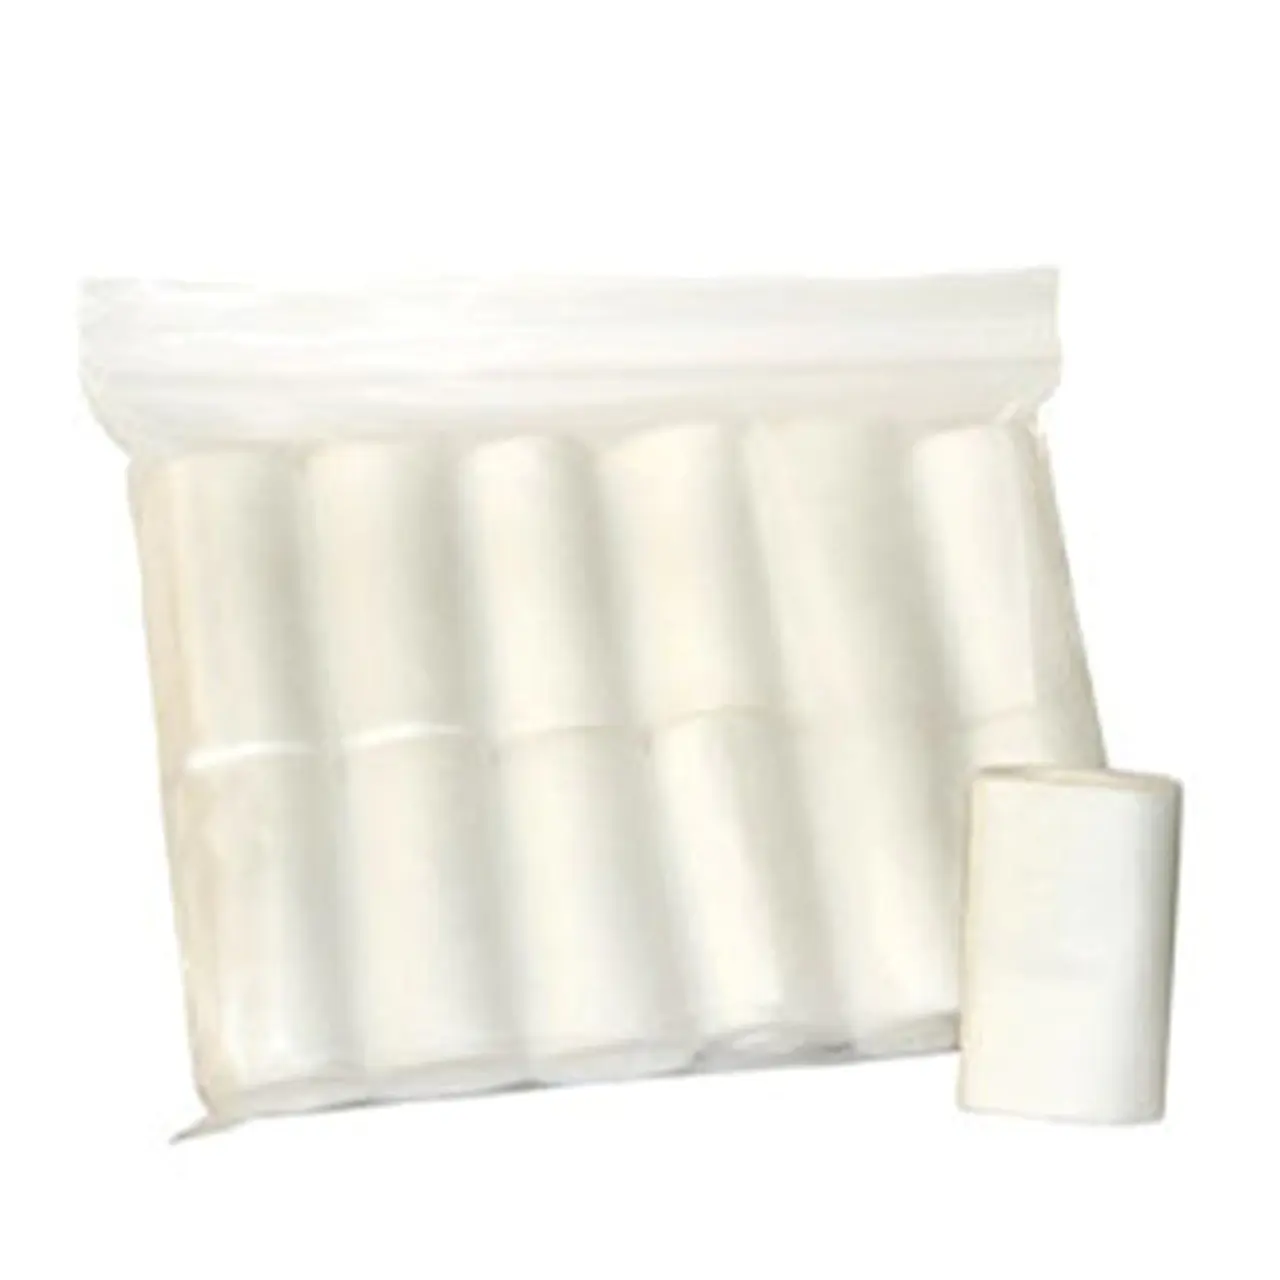 wound care use good Medical Bleached first aid use Absorbent Cotton Gauze roll